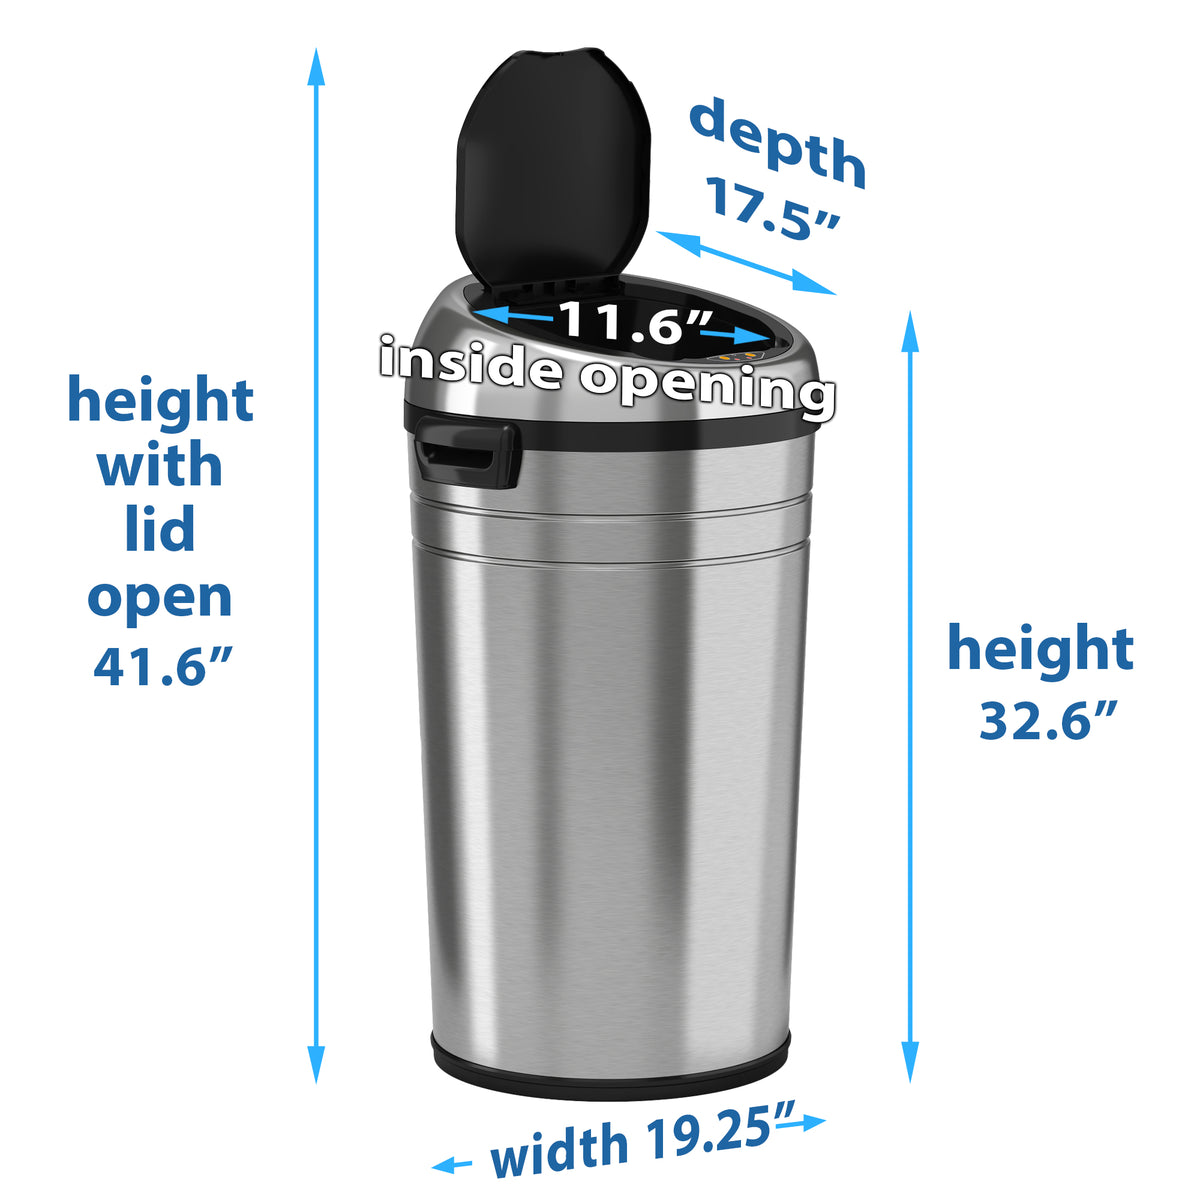 23 Gallon Large Sensor Trash Can with Wheels – iTouchless